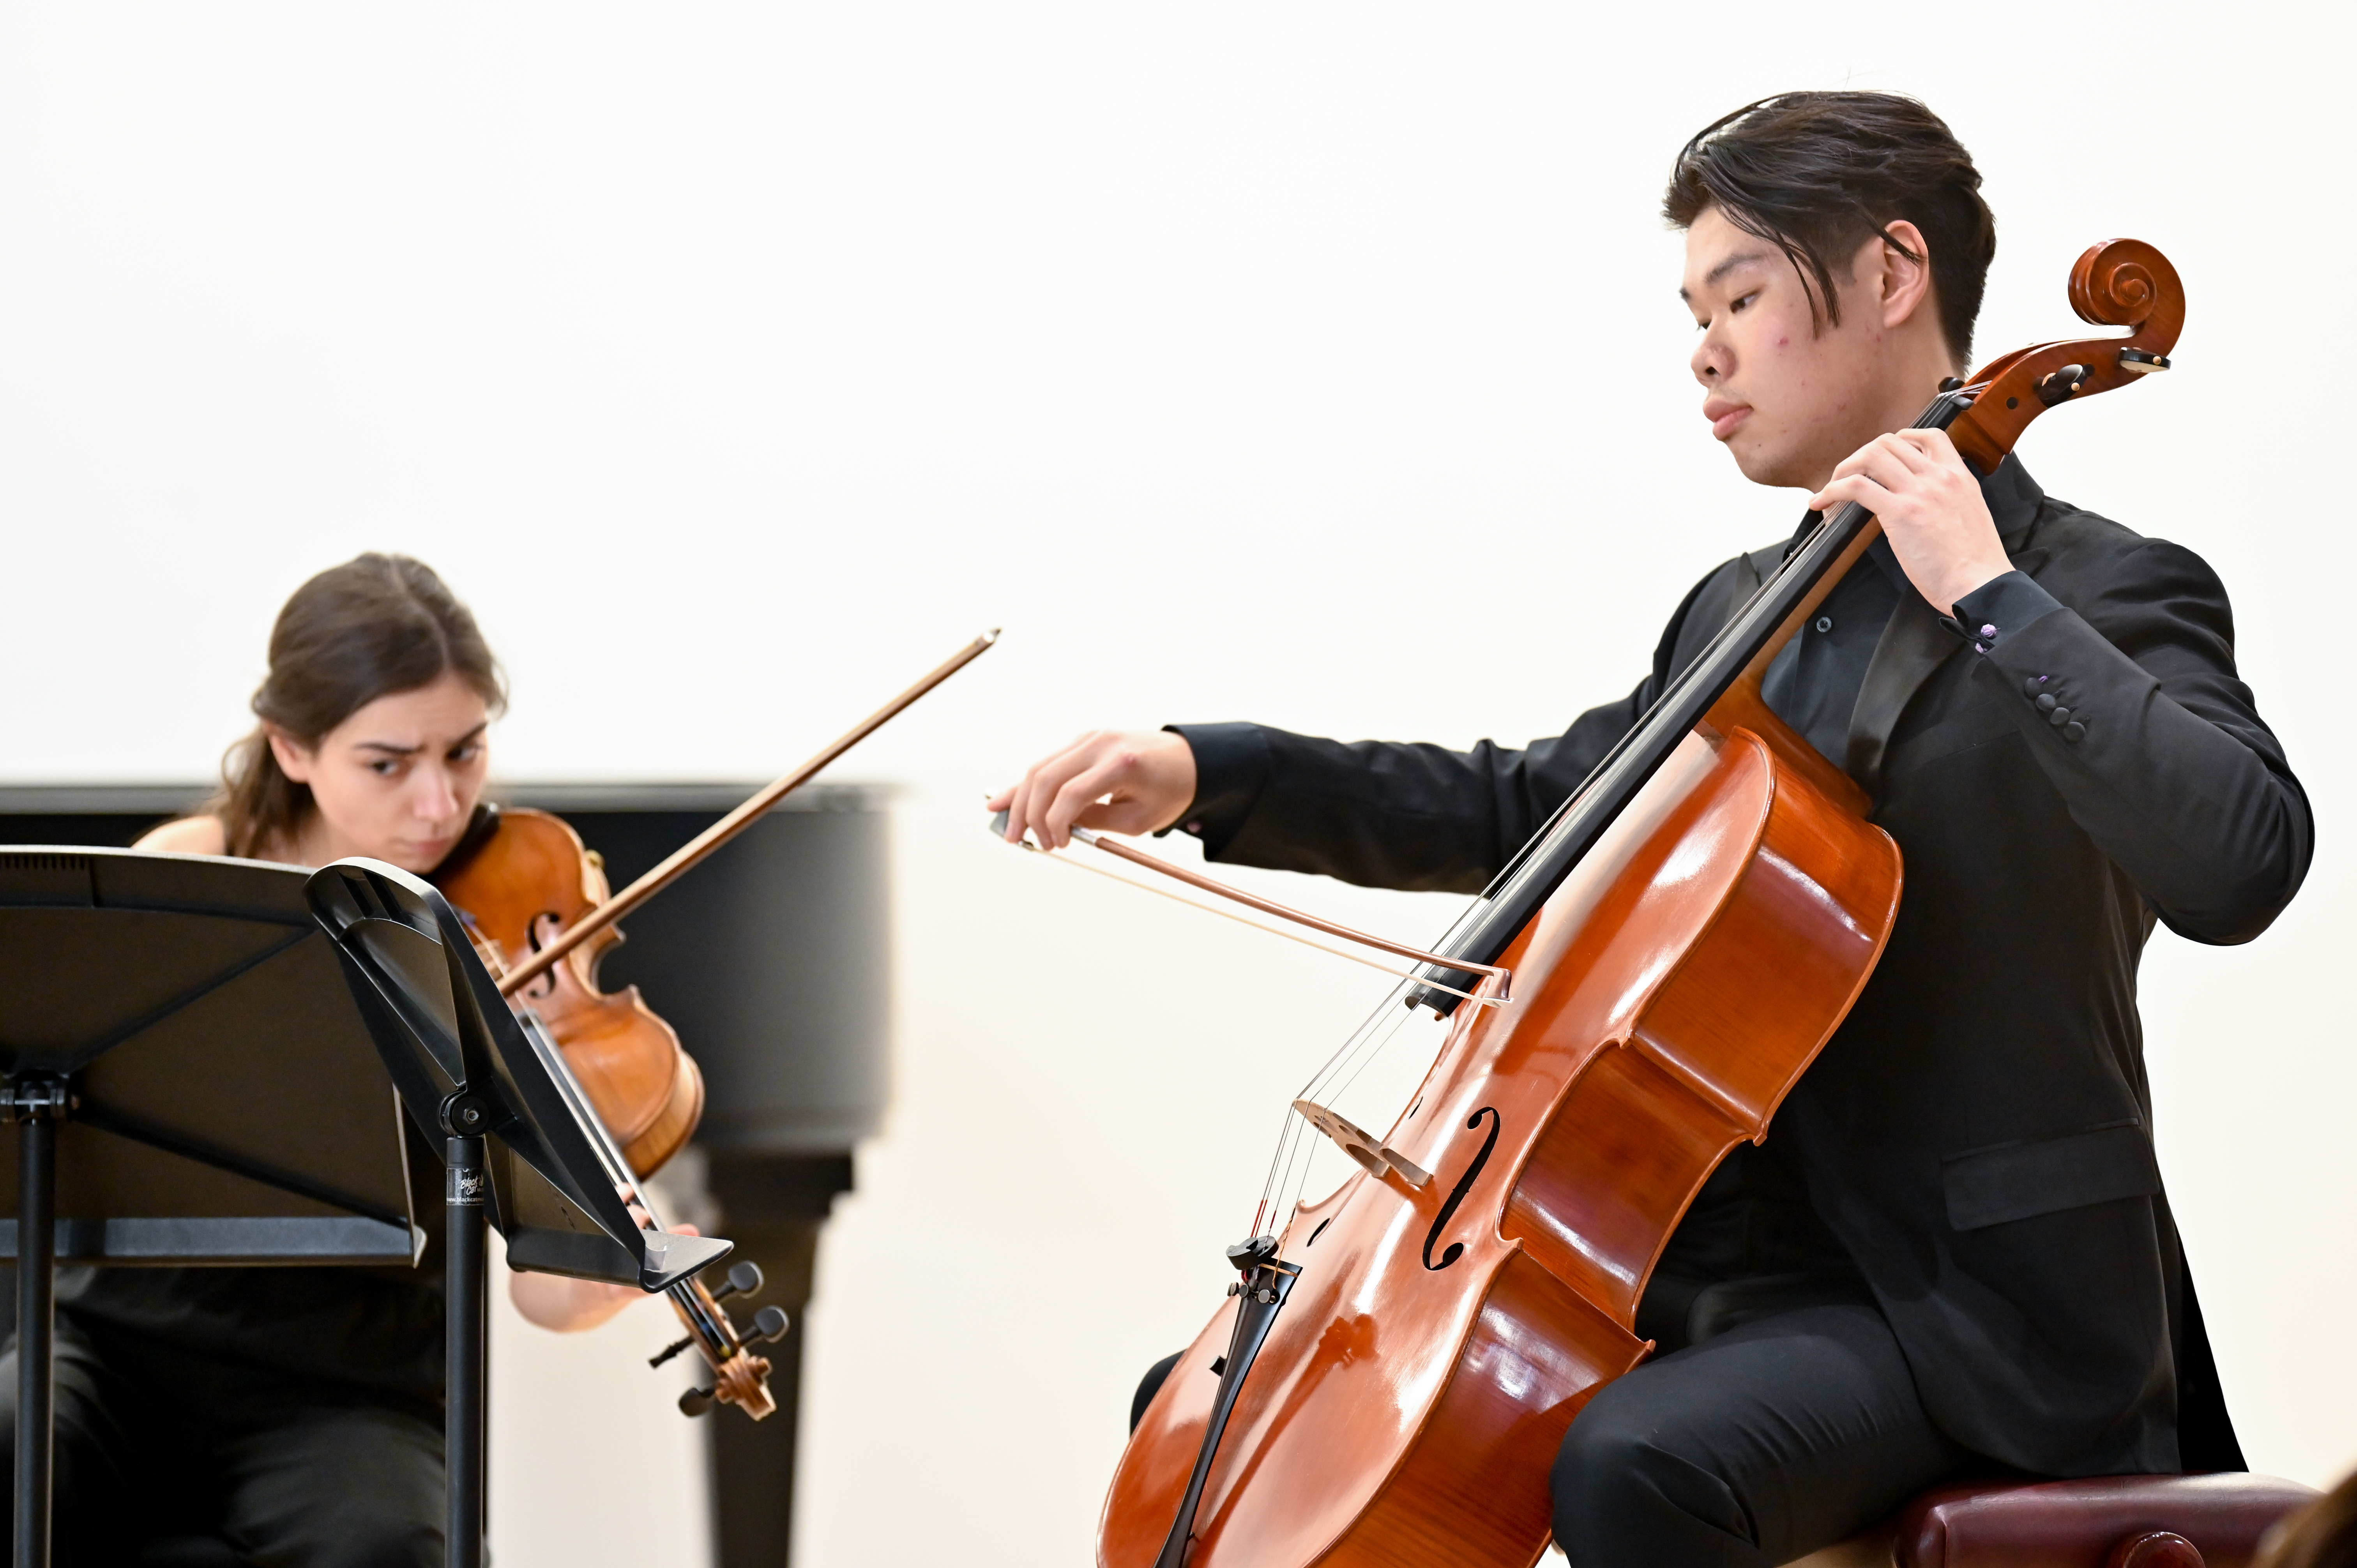 A cellist and violinst perform together as part of a piano trio